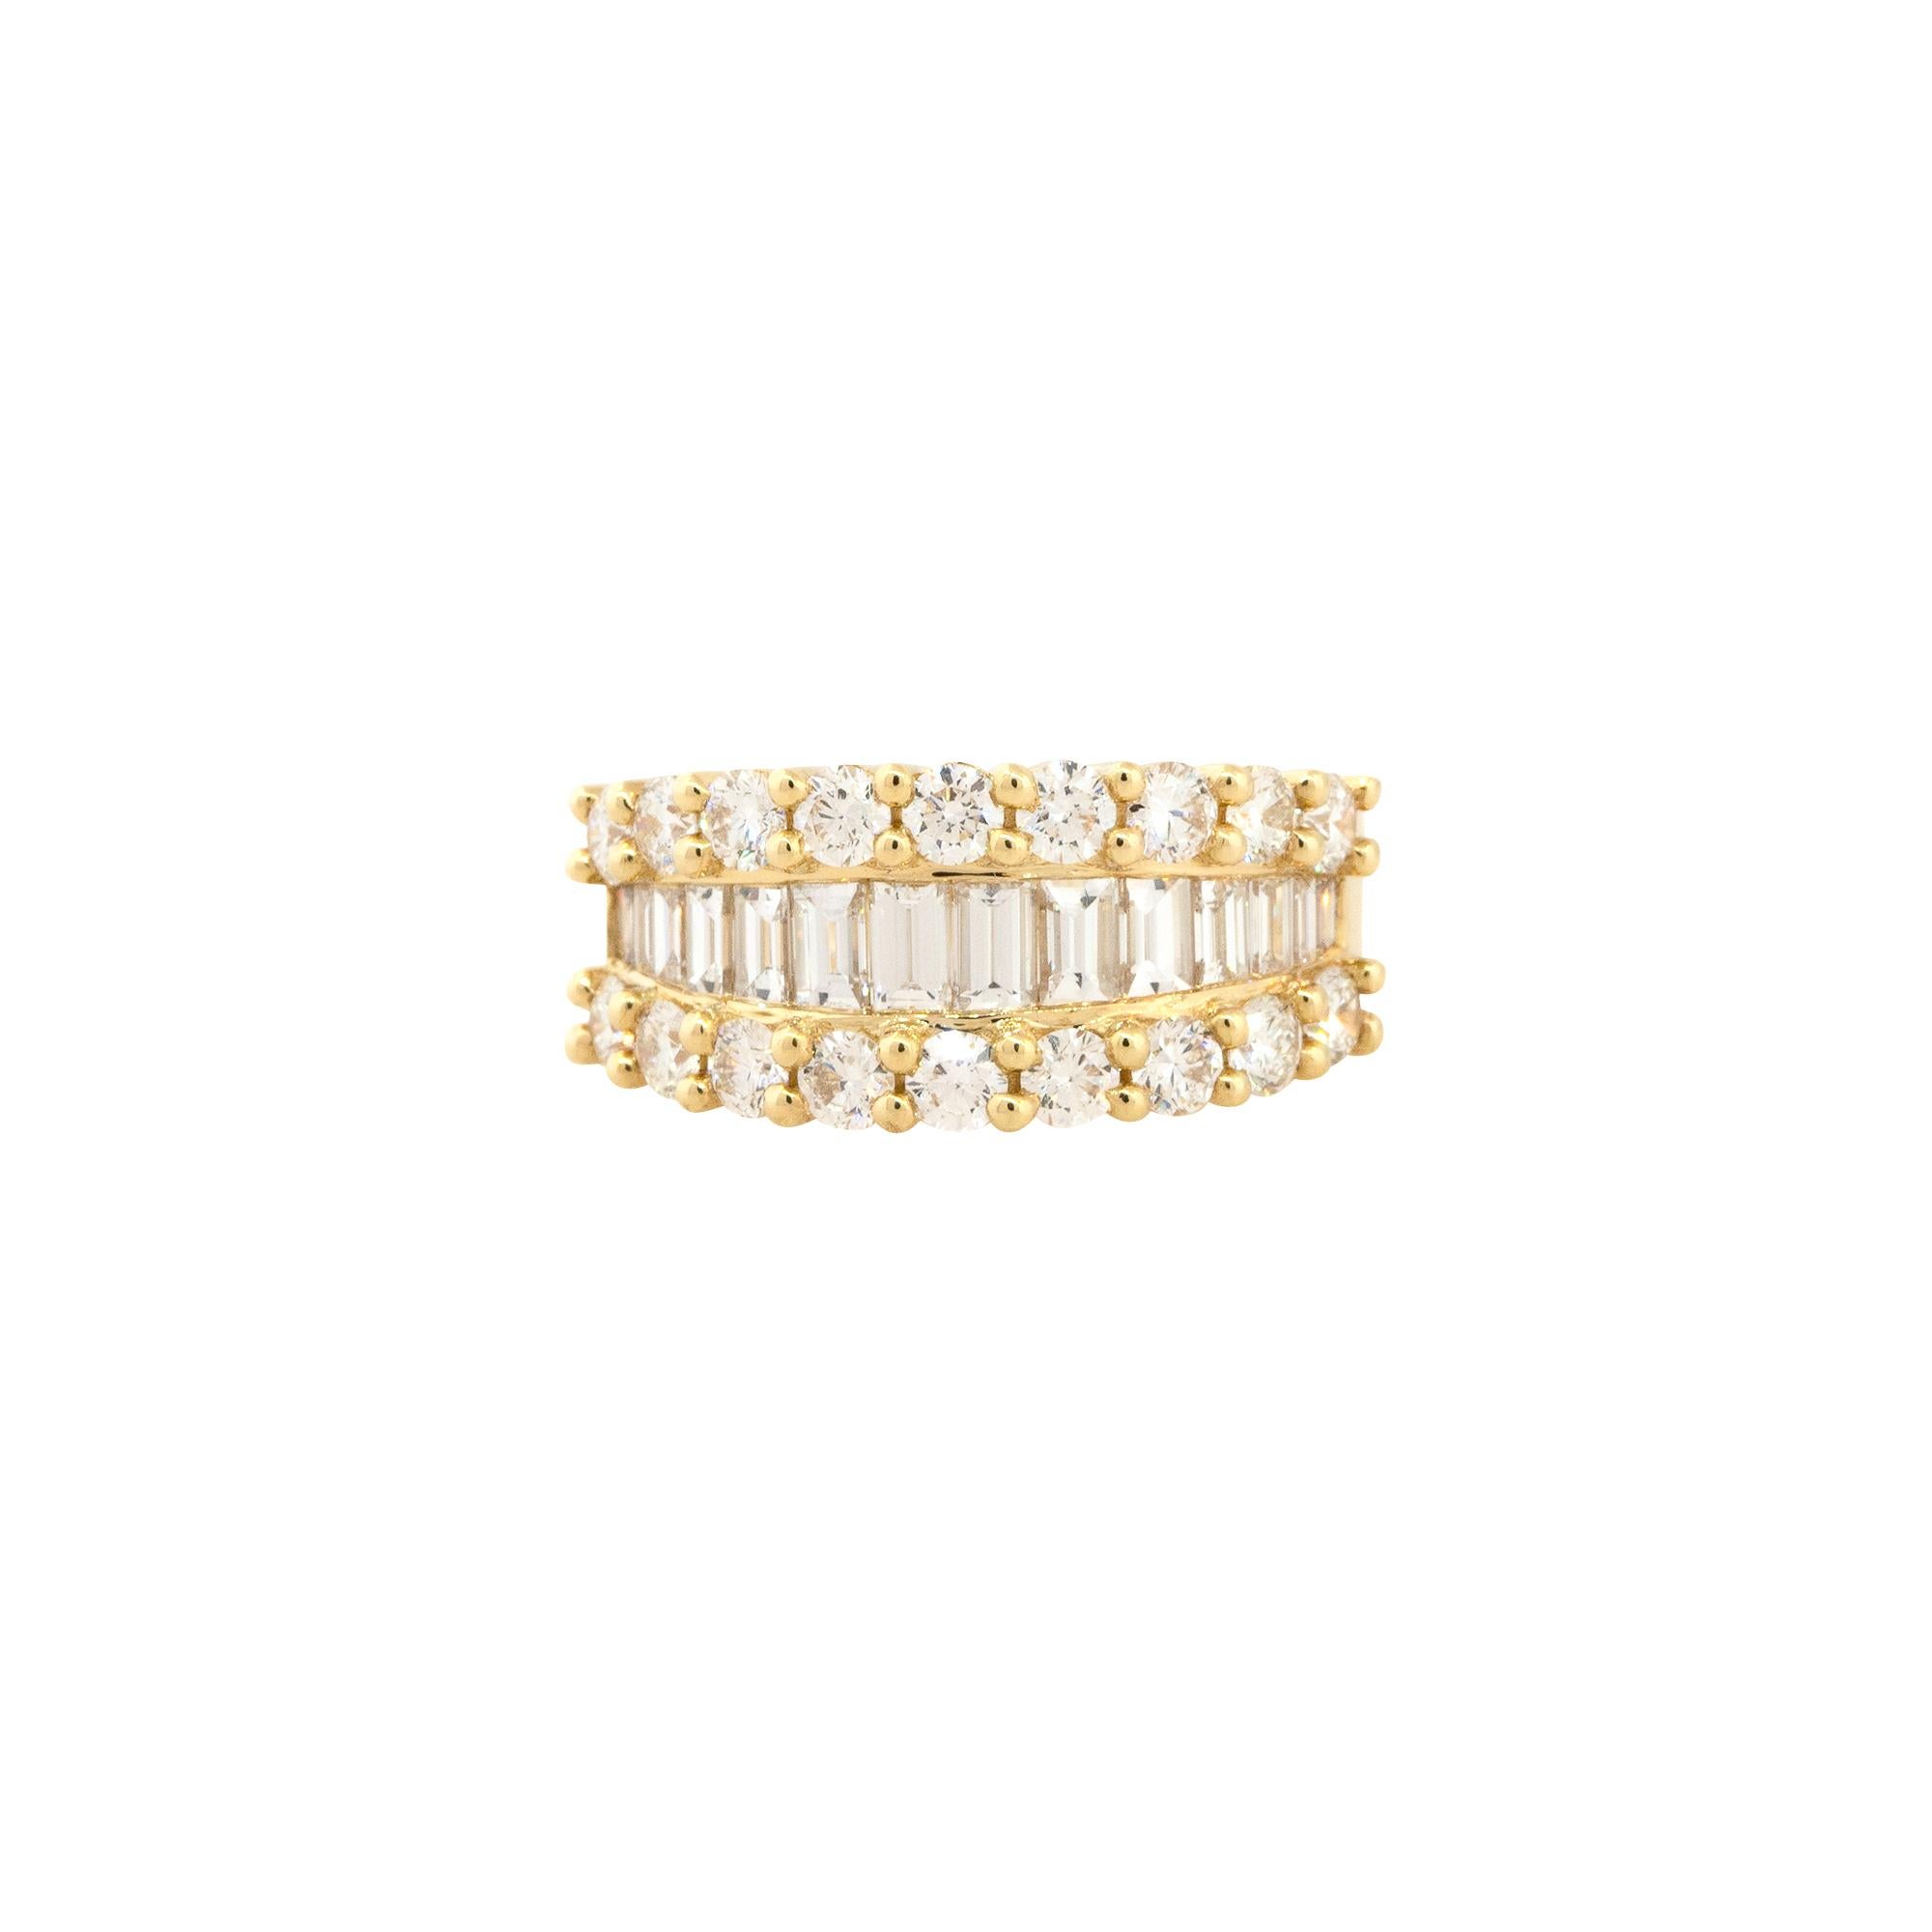 18k Yellow Gold 2.64ctw Round and Baguette Cut Diamond Bridal Band

Raymond Lee Jewelers in Boca Raton -- South Florida’s destination for diamonds, fine jewelry, antique jewelry, estate pieces, and vintage jewels.

Style: Women's Diamond Bridal